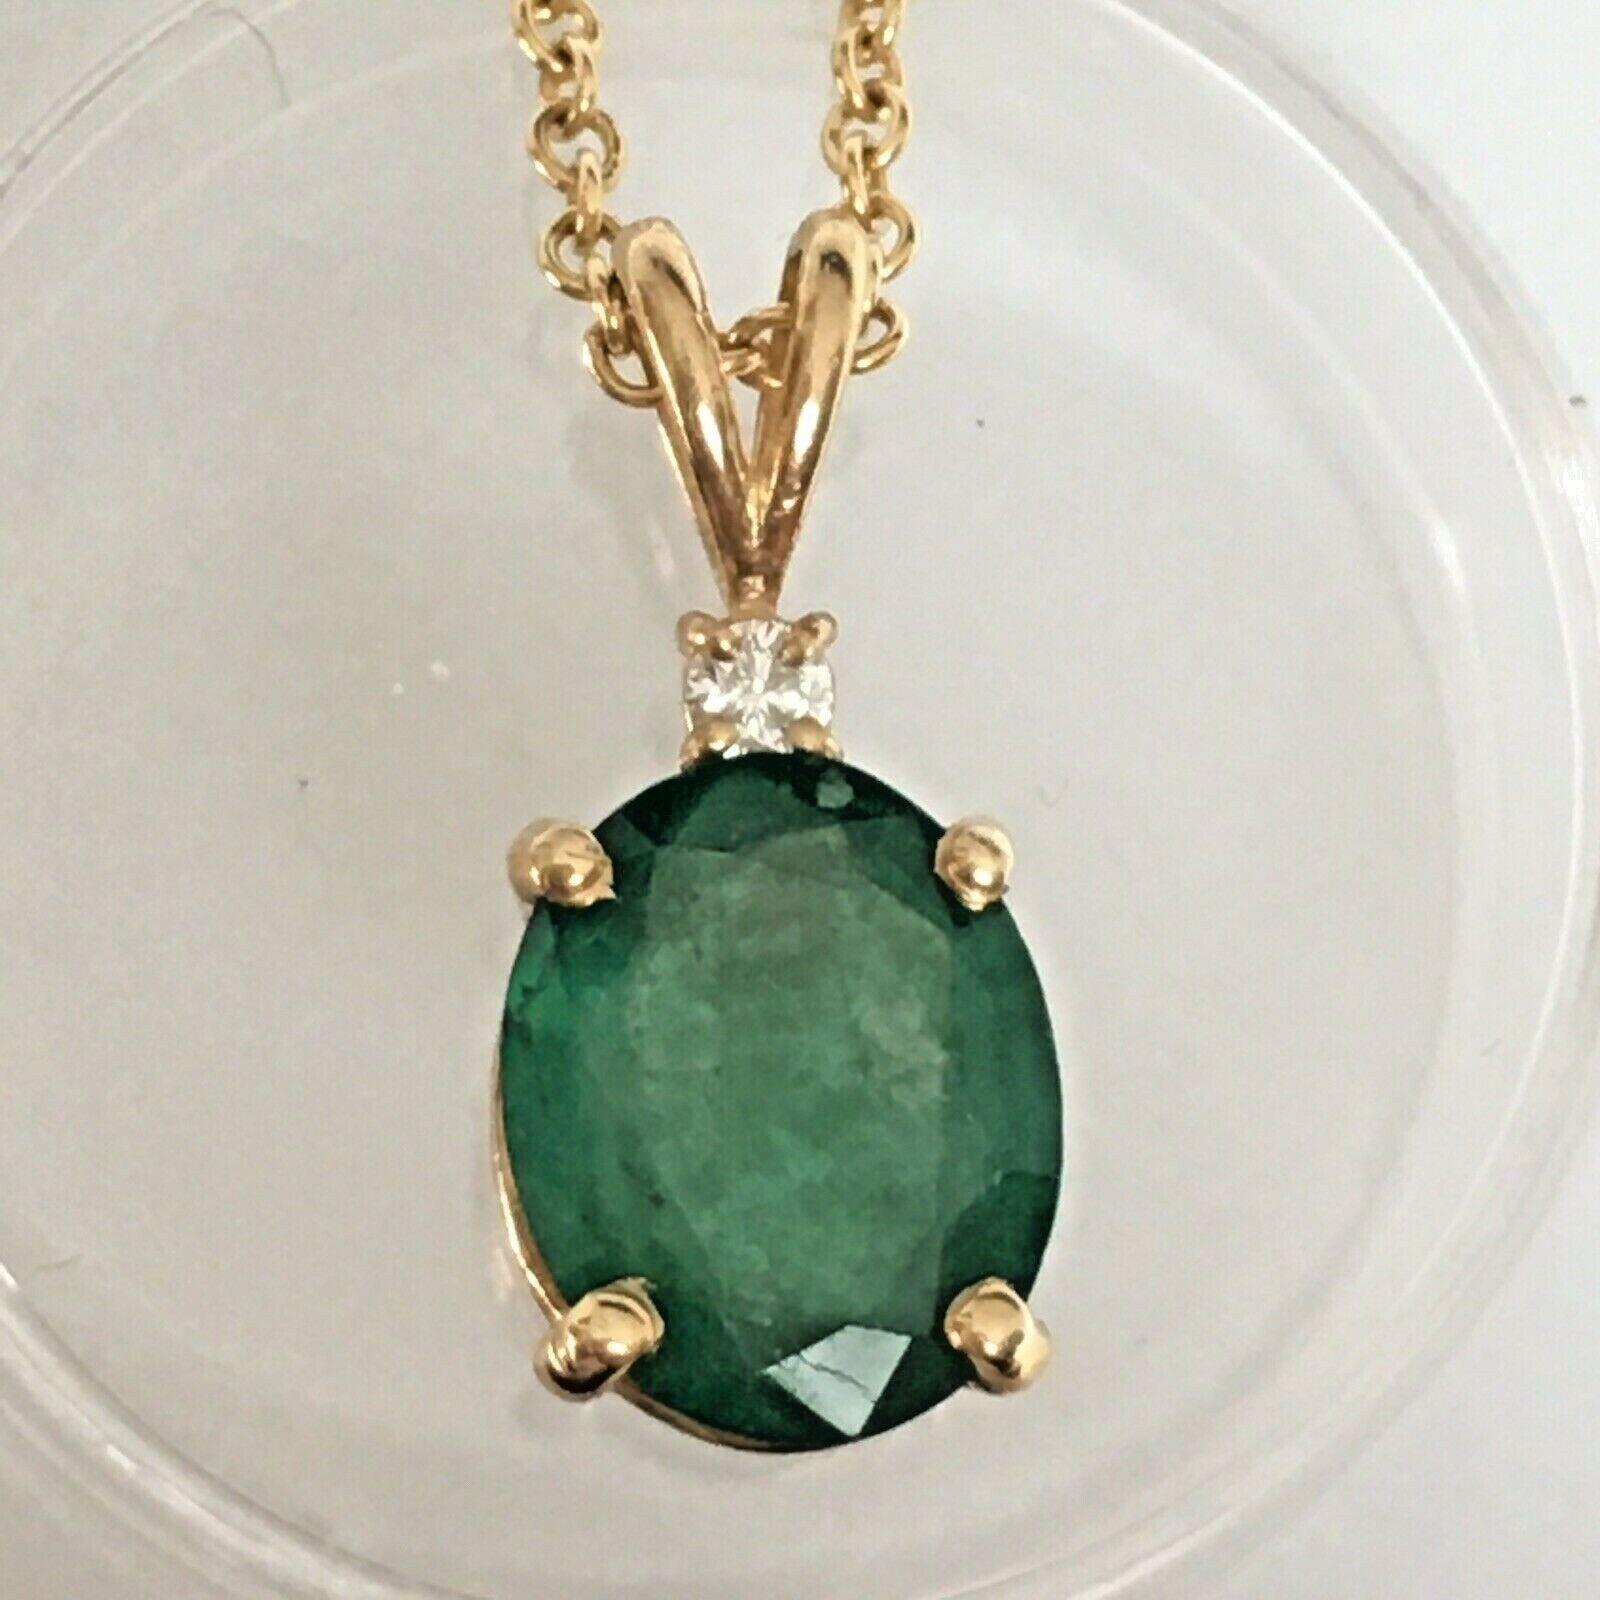 Natural Earth Mind Emerald Diamond Prong Set Pendant Gold 14K
1.5 Carat Oval Cut Emerald, 7.8 mm 9.6 mm by 4 mm
a full cut Diamond of 1.3 mm 
16 inch 14K gold Cable chain
All in good condition, no damage, see pictures 

